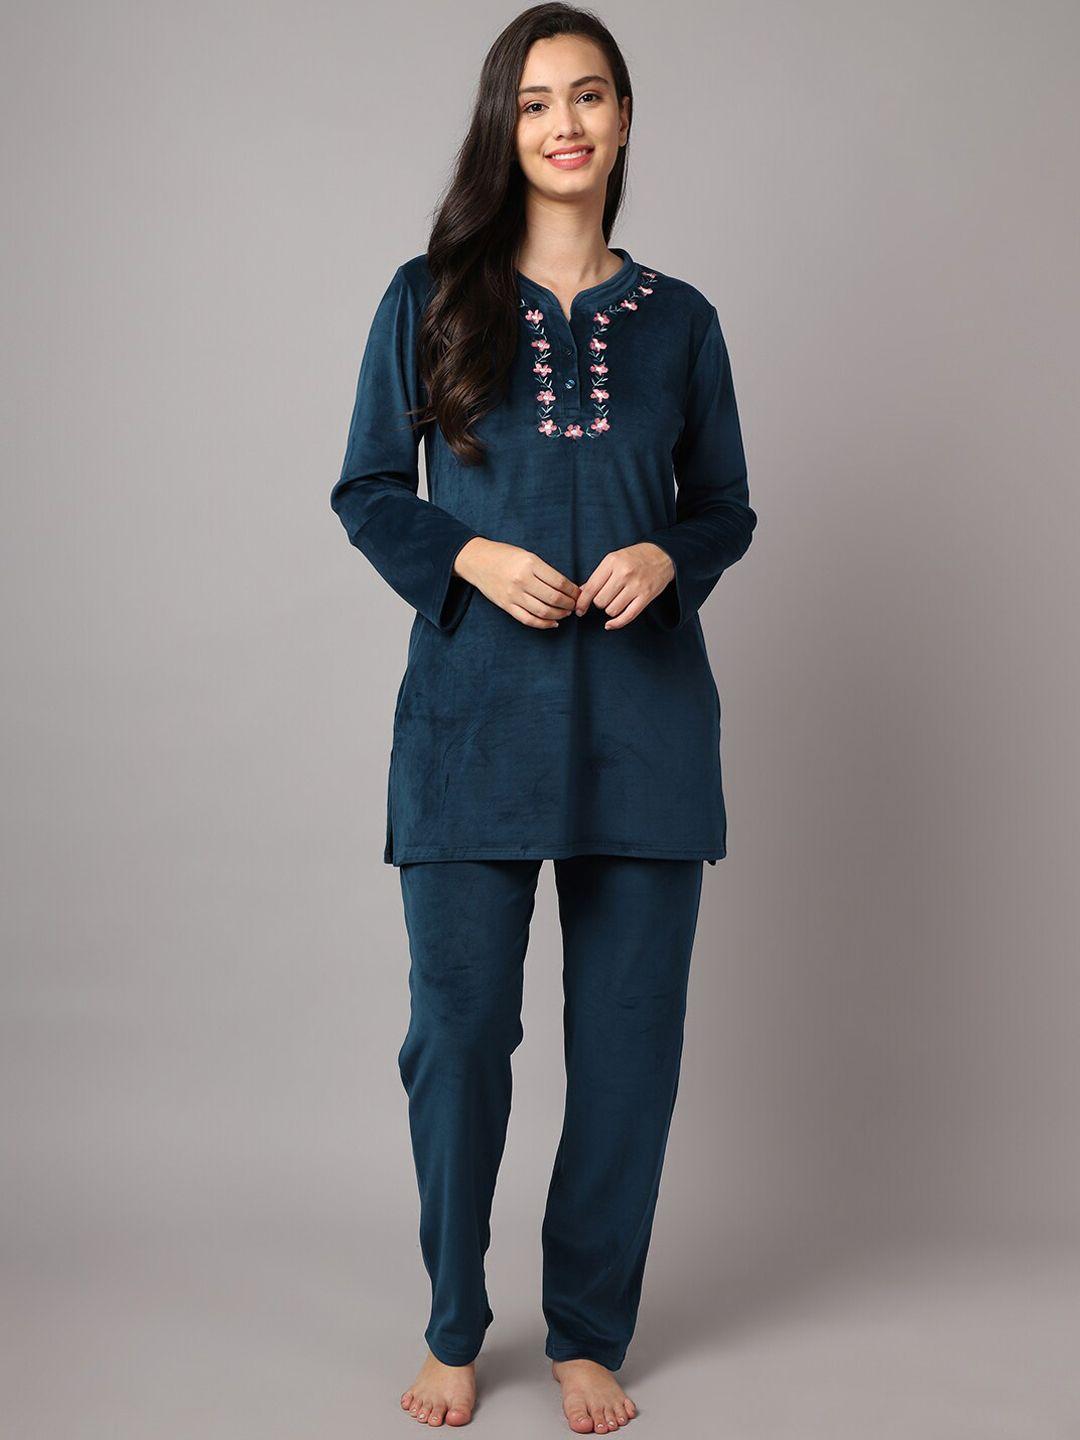 aerowarm floral embroidered night suit